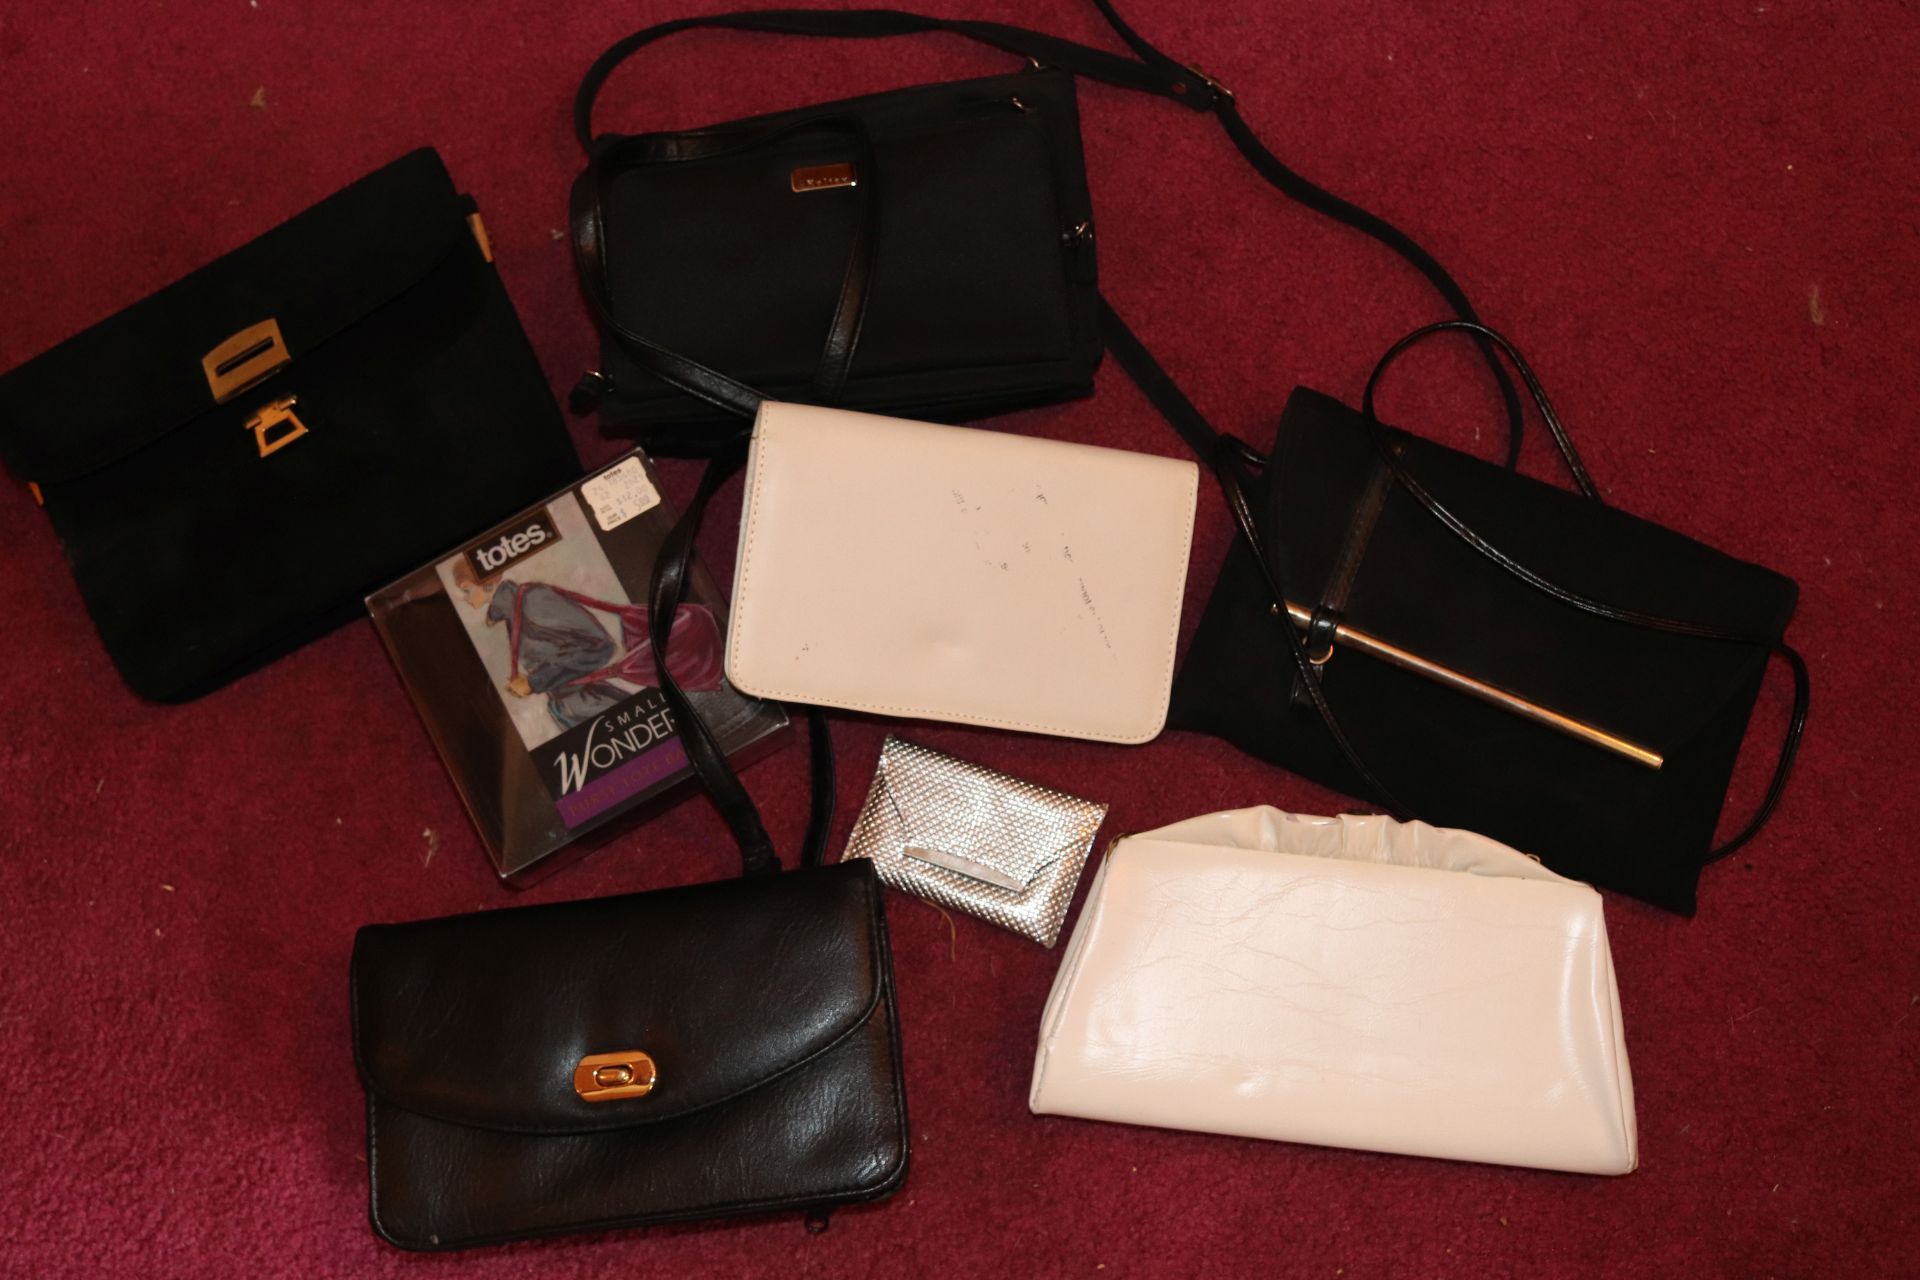 Ladies' purses and two framed prints and cased Benny the Bull